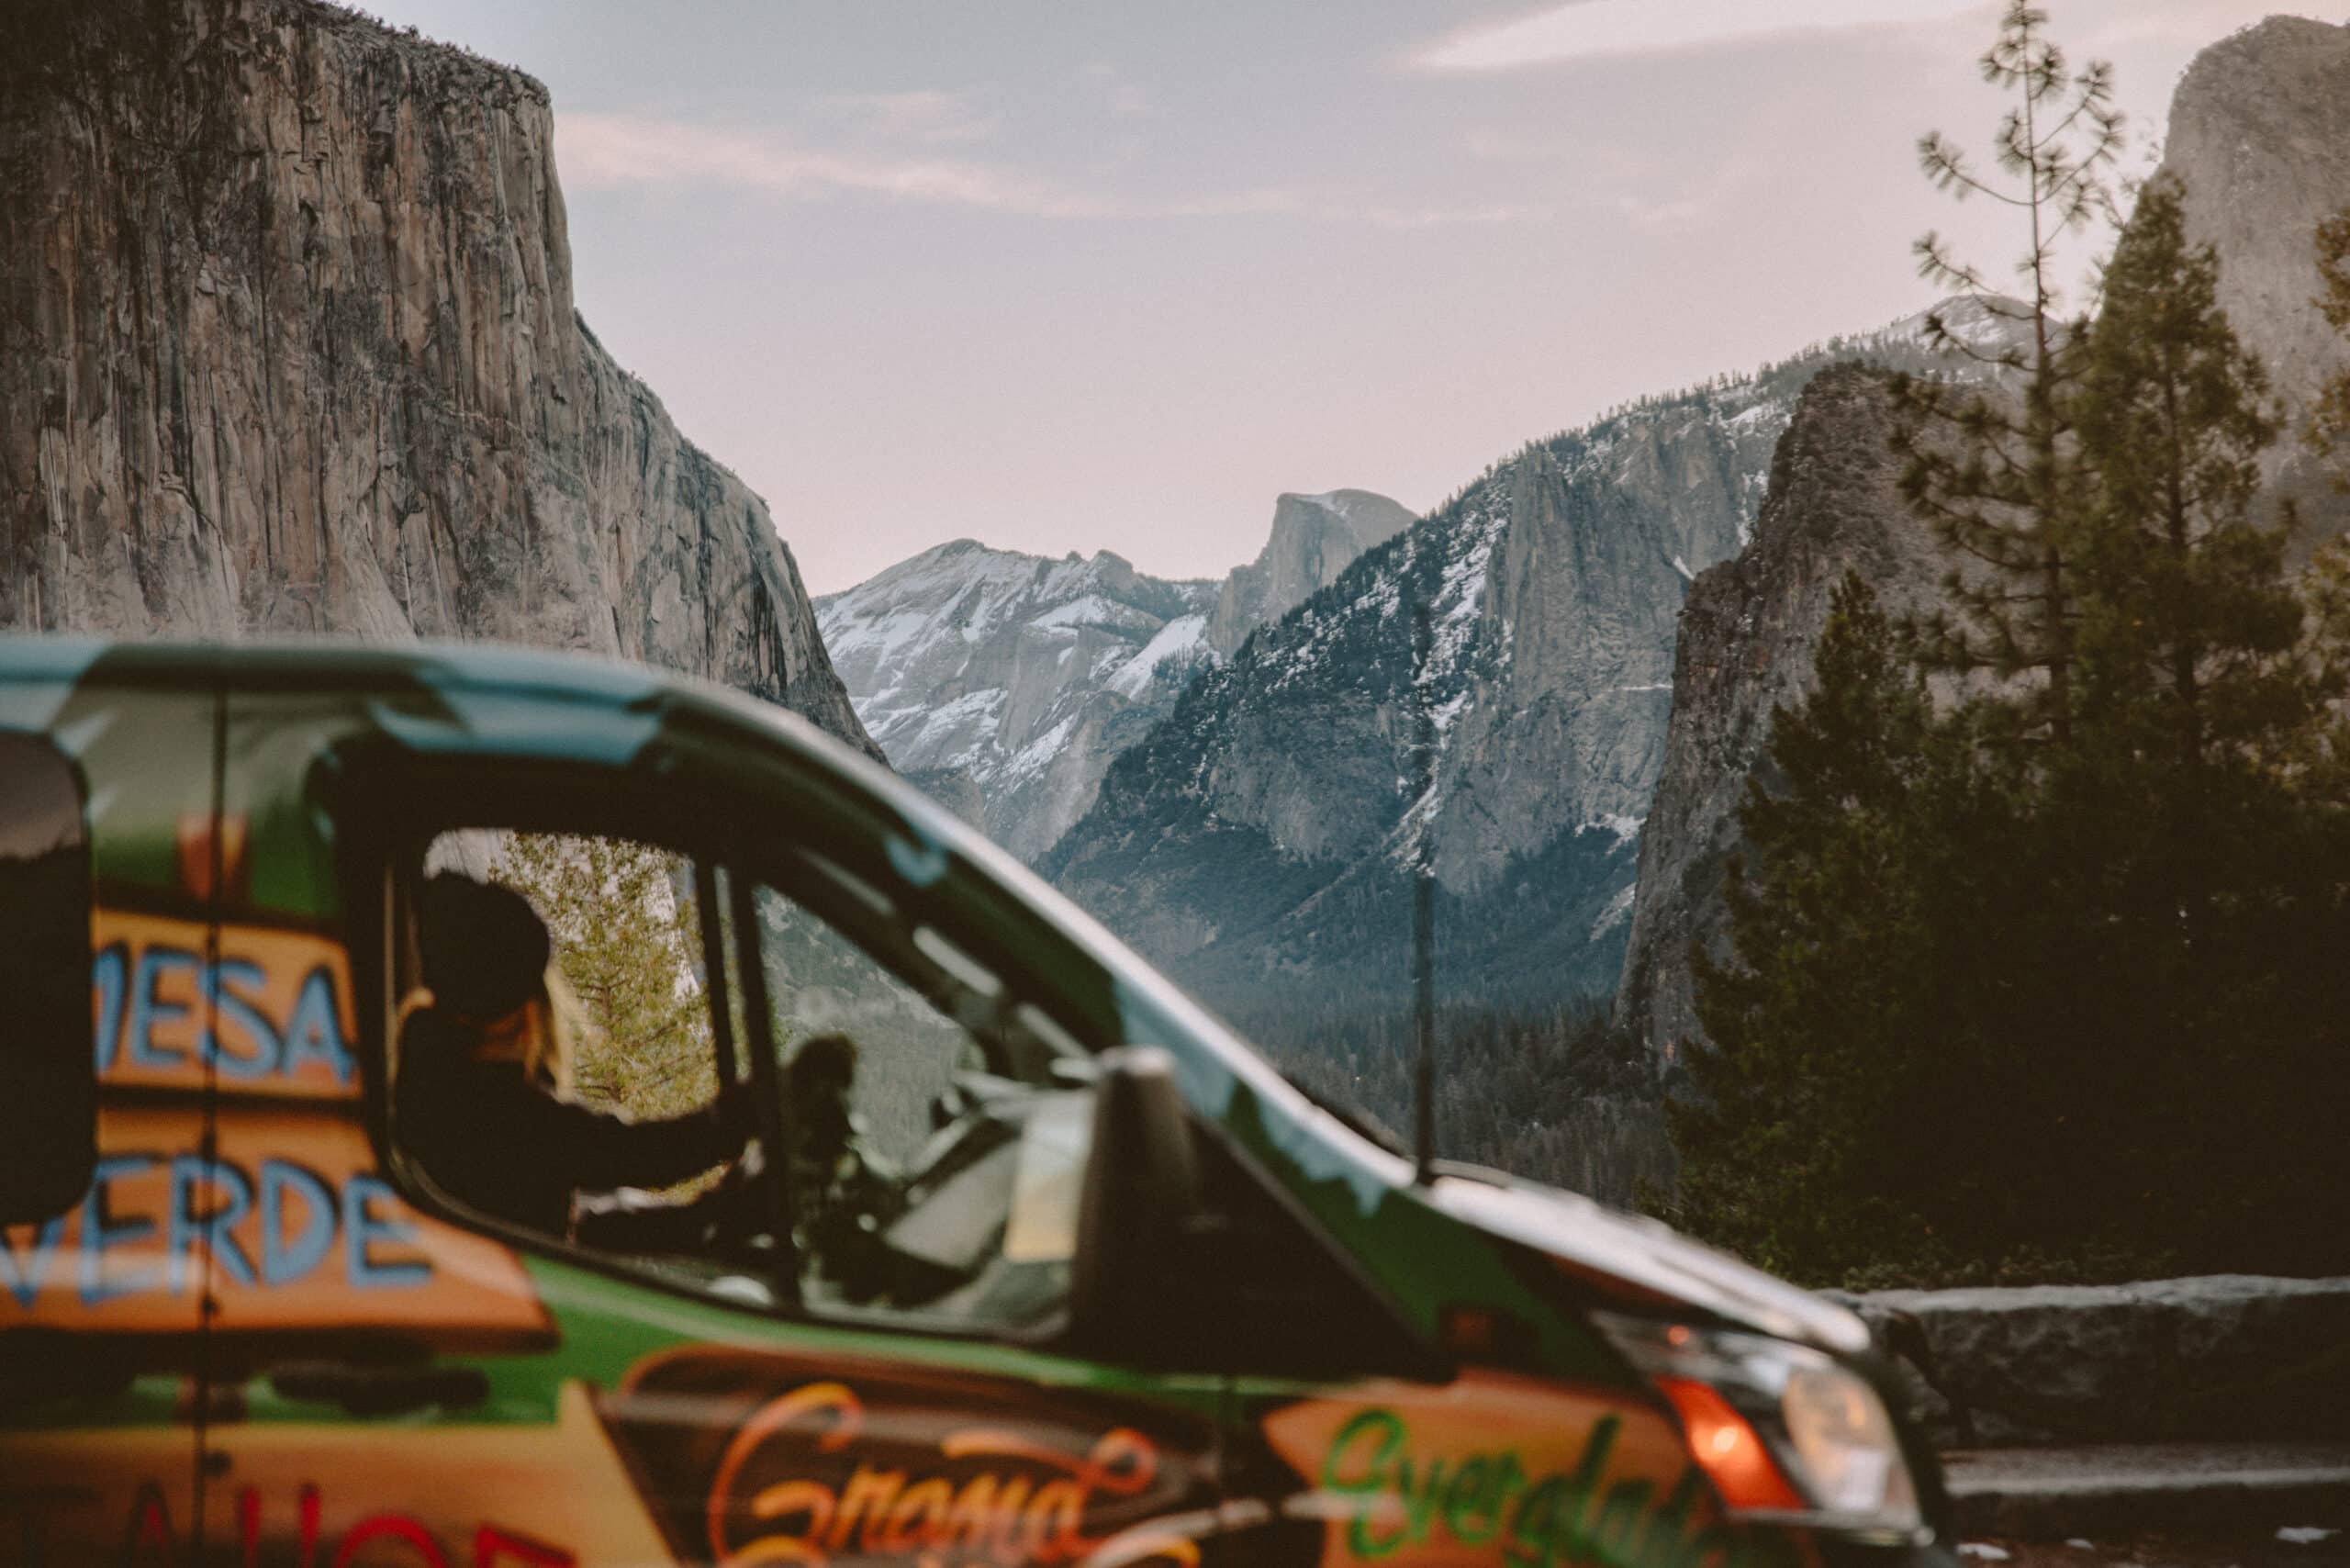 Escape Camper Van in Yosemite National Park, the perfect detour for a Los Angeles to San Francisco road trip.